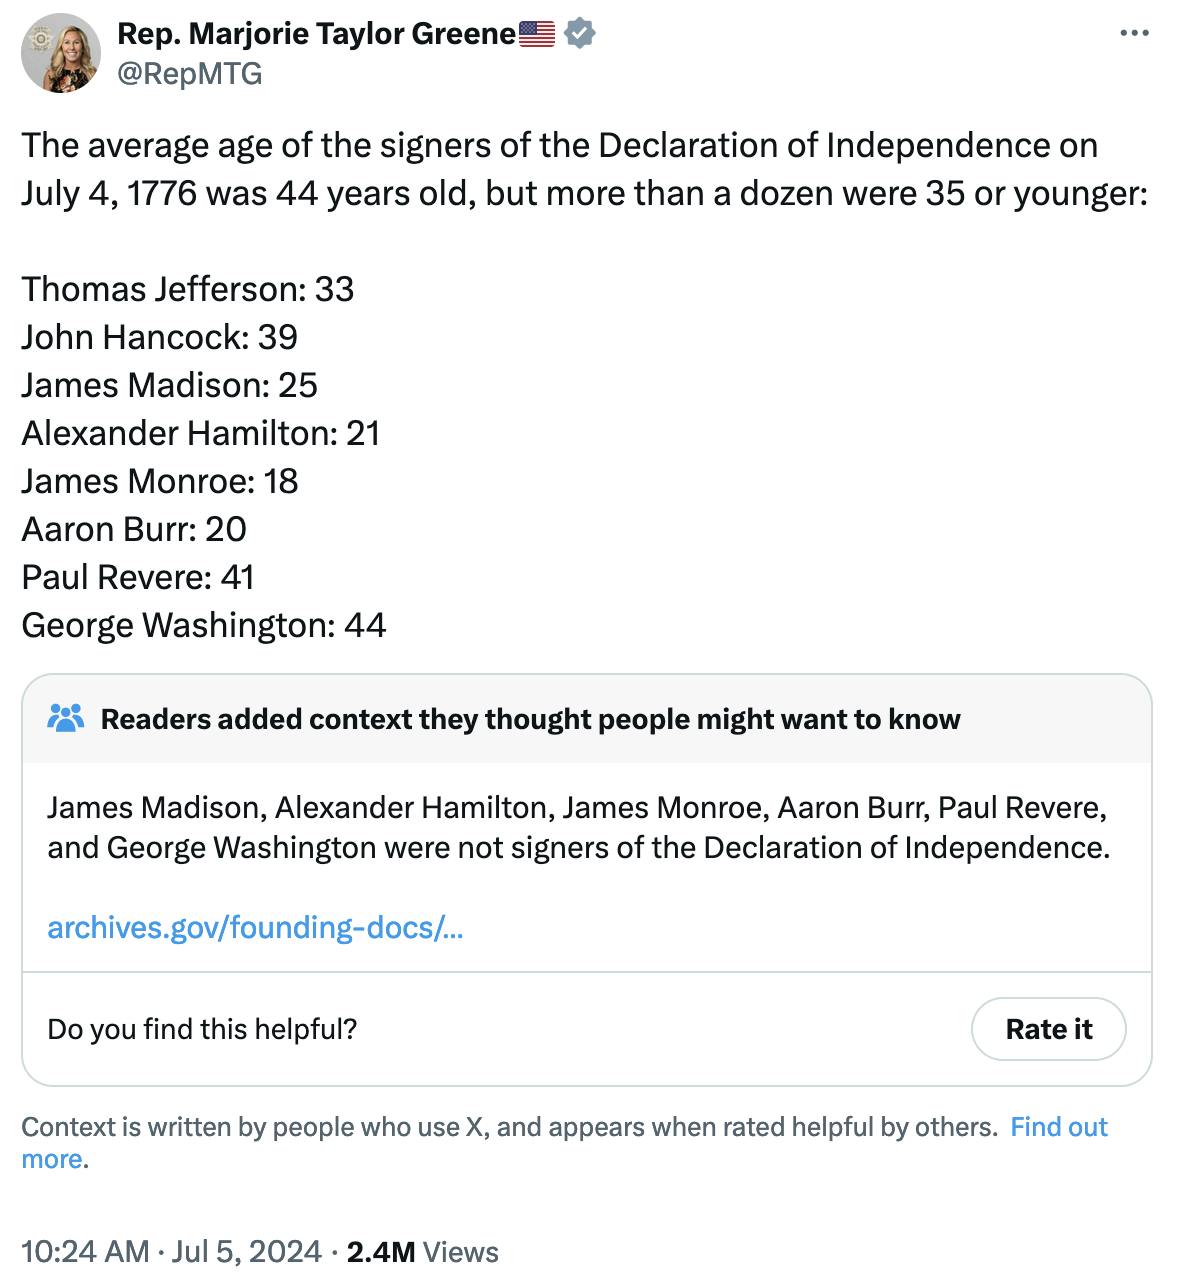 Tweet screenshot Marjorie Taylor Greene: The average age of the signers of the Declaration of Independence on July 4, 1776 was 44 years old, but more than a dozen were 35 or younger: Thomas Jefferson: 33 John Hancock: 39 James Madison: 25 Alexander Hamilton: 21 James Monroe: 18 Aaron Burr: 20 Paul Revere: 41 George Washington: 44 Readers added context they thought people might want to know James Madison, Alexander Hamilton, James Monroe, Aaron Burr, Paul Revere, and George Washington were not signers of the Declaration of Independence. archives.gov/founding-docs/…